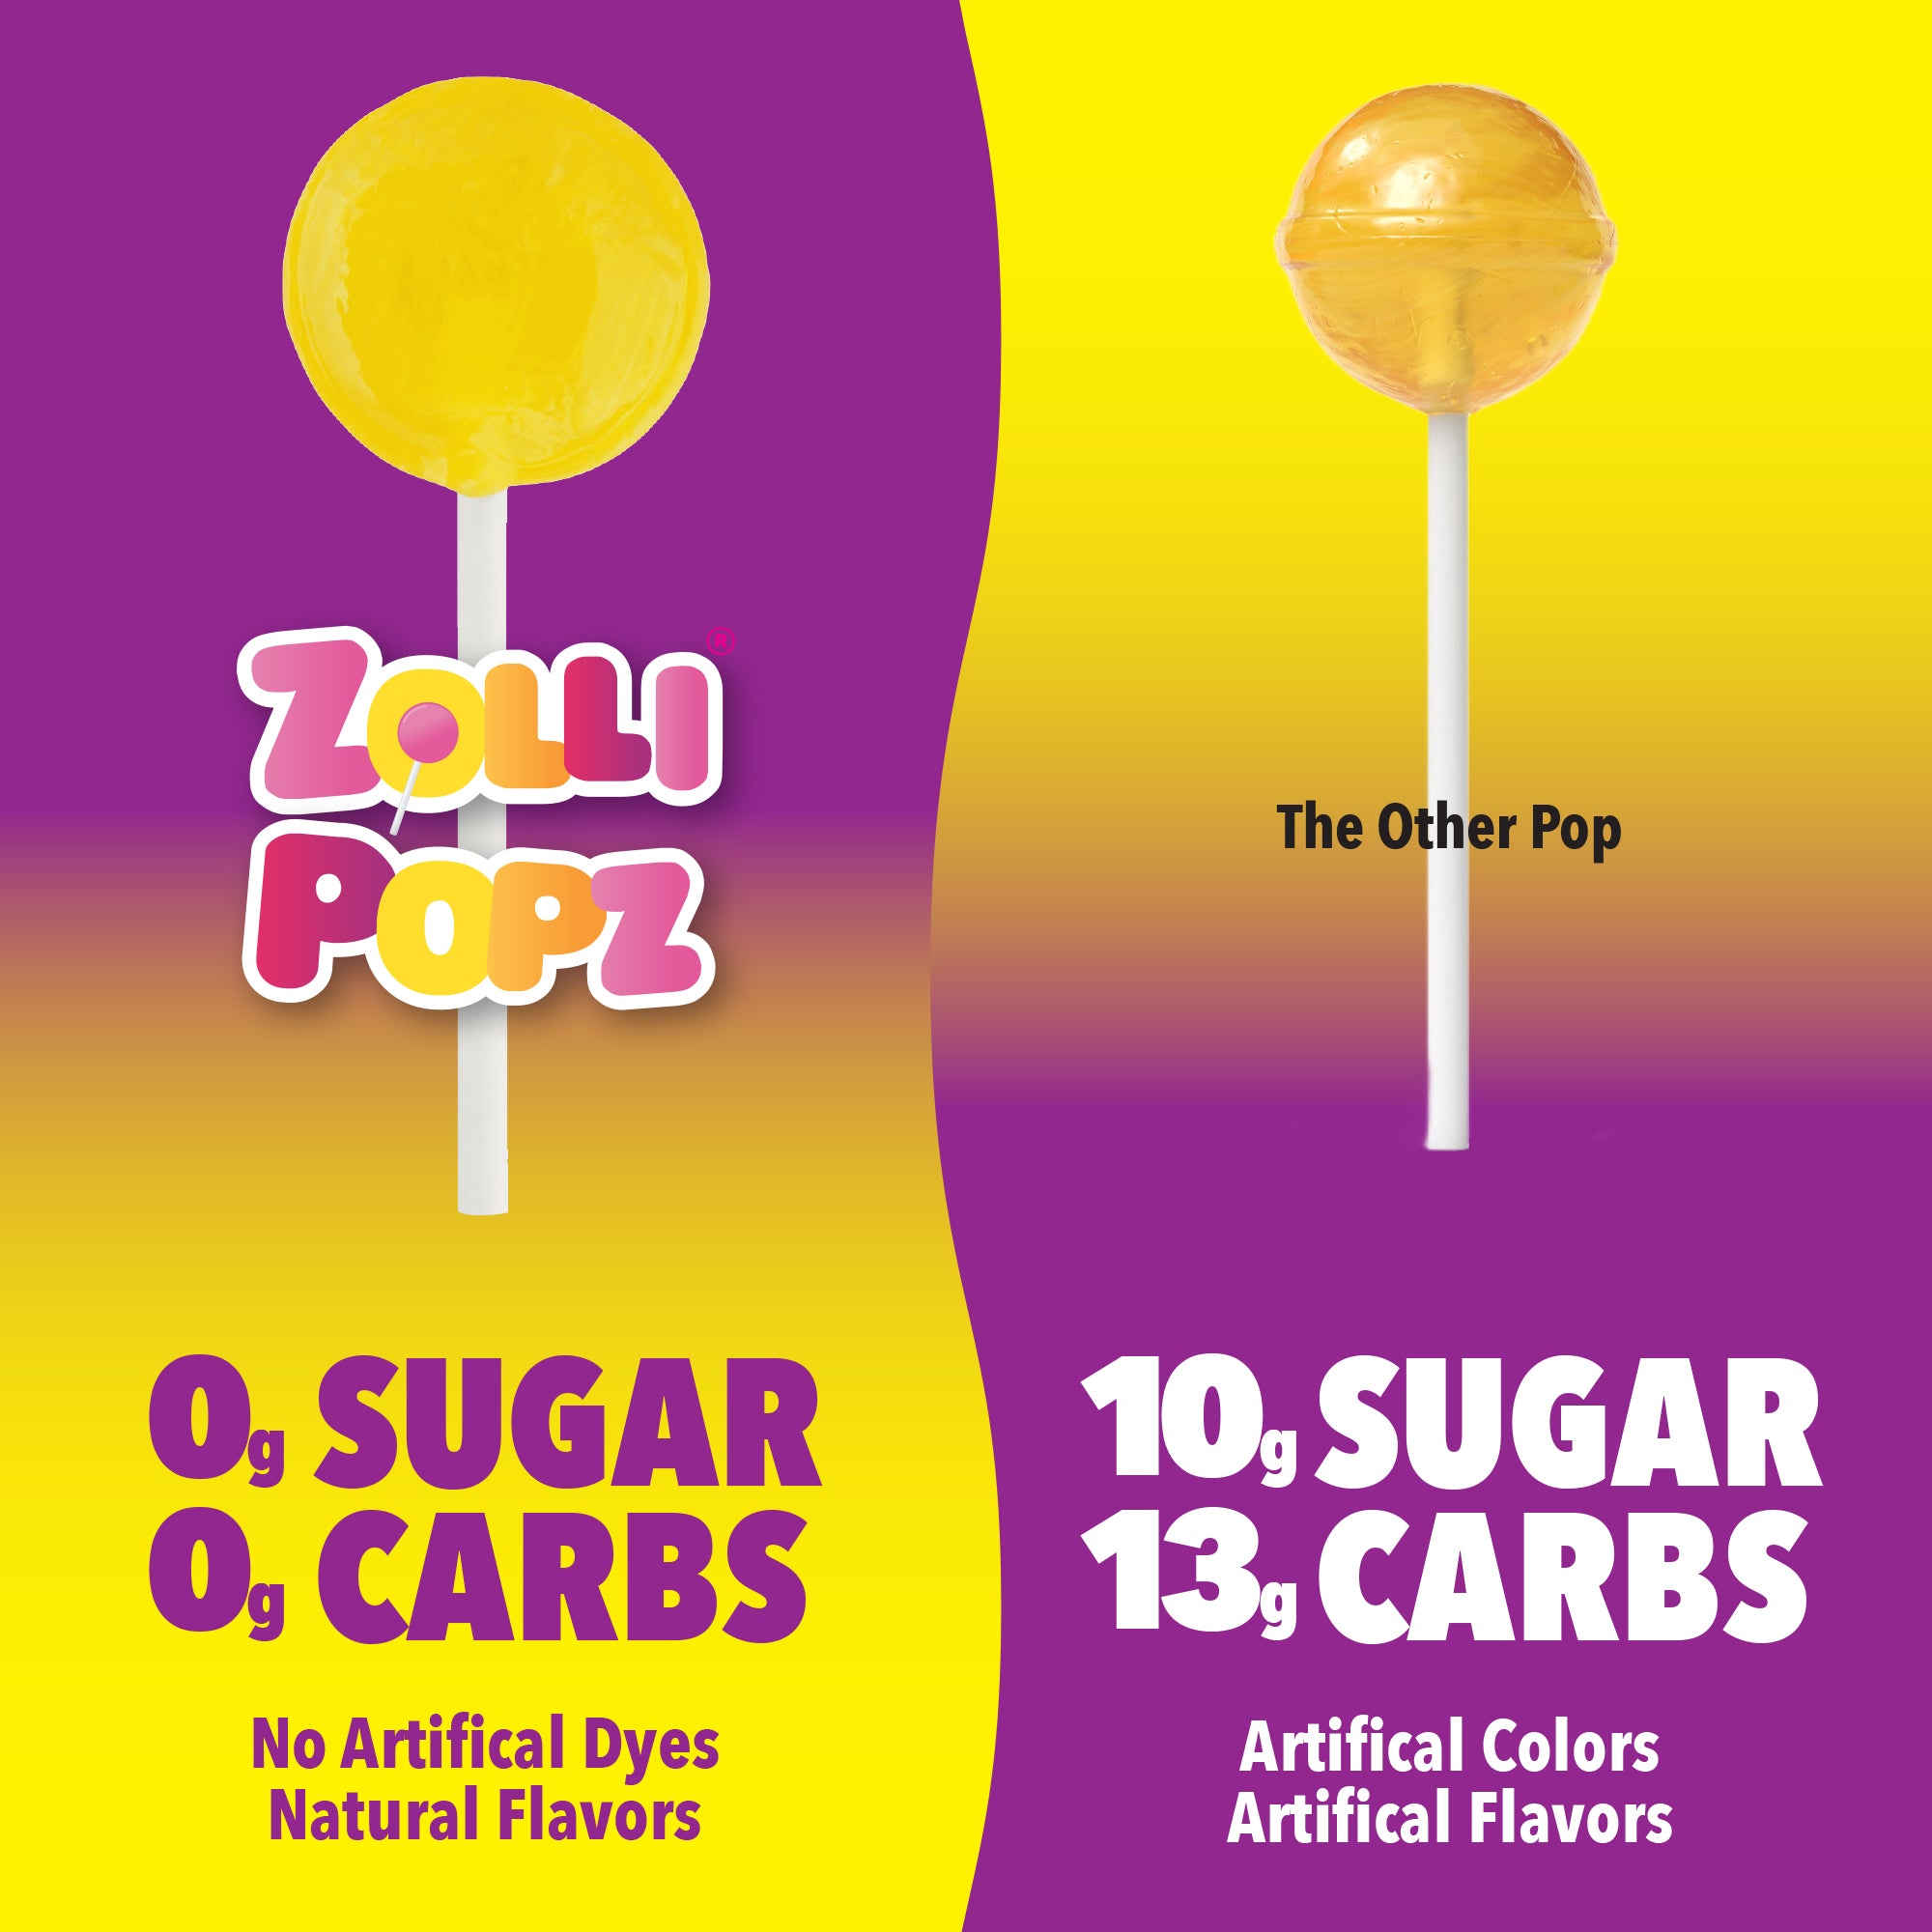 Zollipops Peach Clean Teeth Lollipops Case. Zollipops have Zero grams of sugar and 0 grams of carbs. Zollipops Peach have No artificial dyes and natural flavors. 